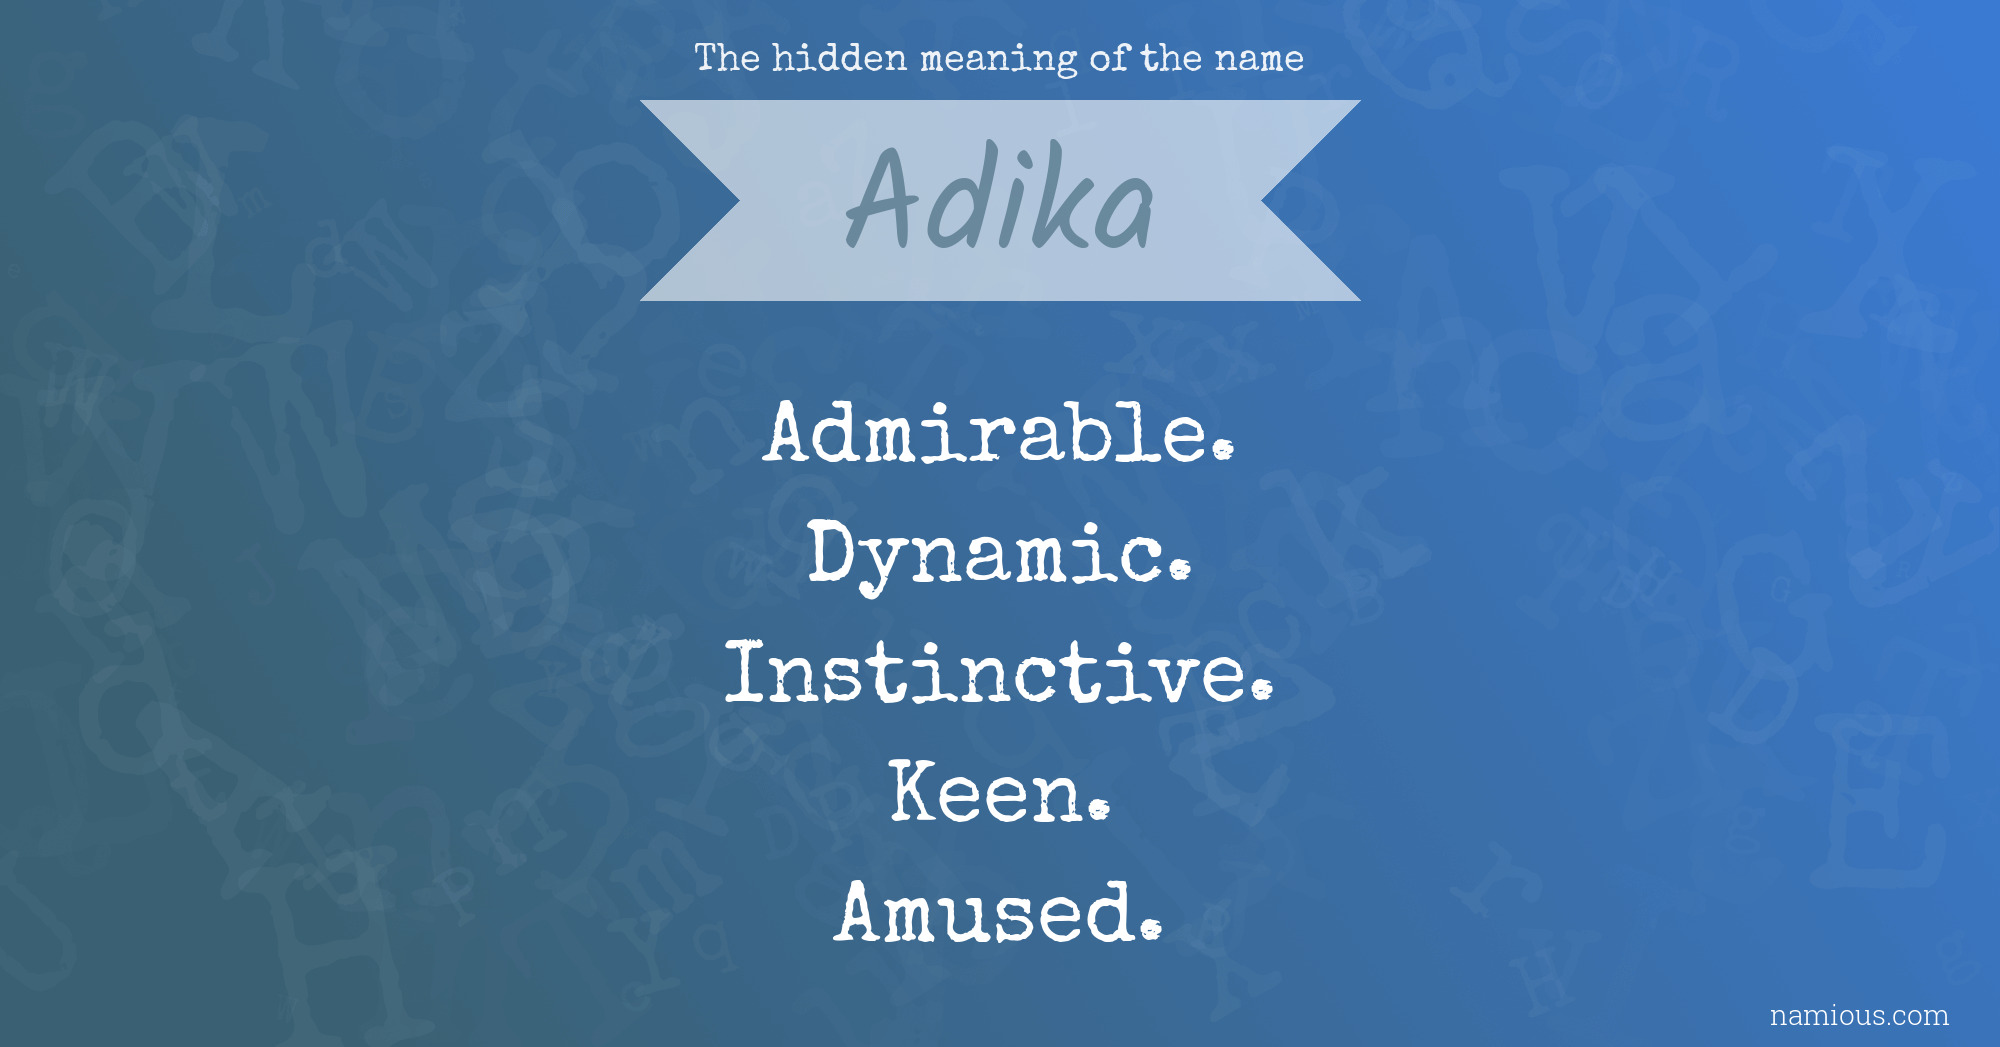 The hidden meaning of the name Adika